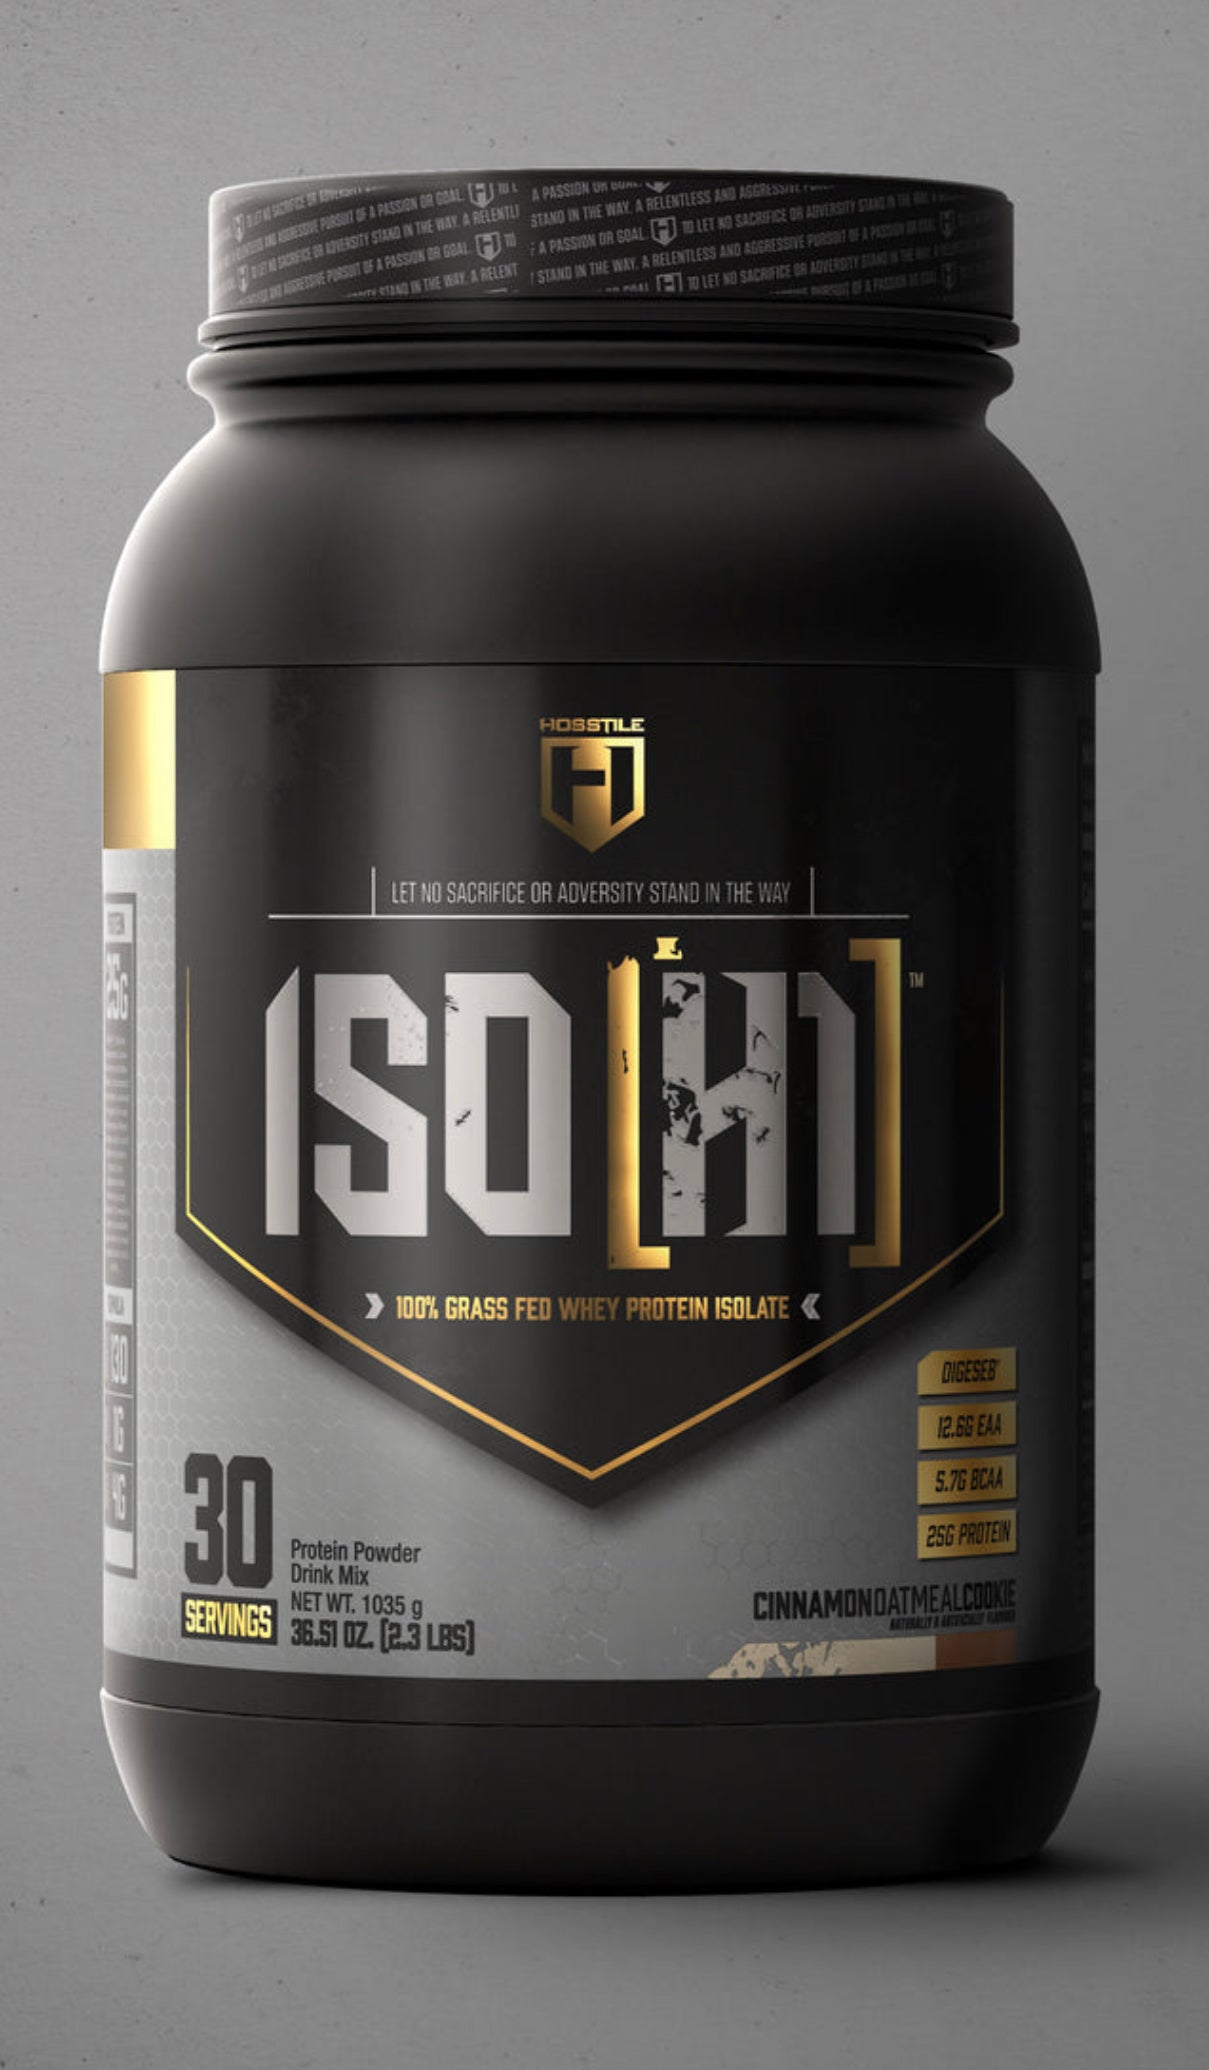 HOSSTILE : ISO[H1] COOKIE PROTEIN